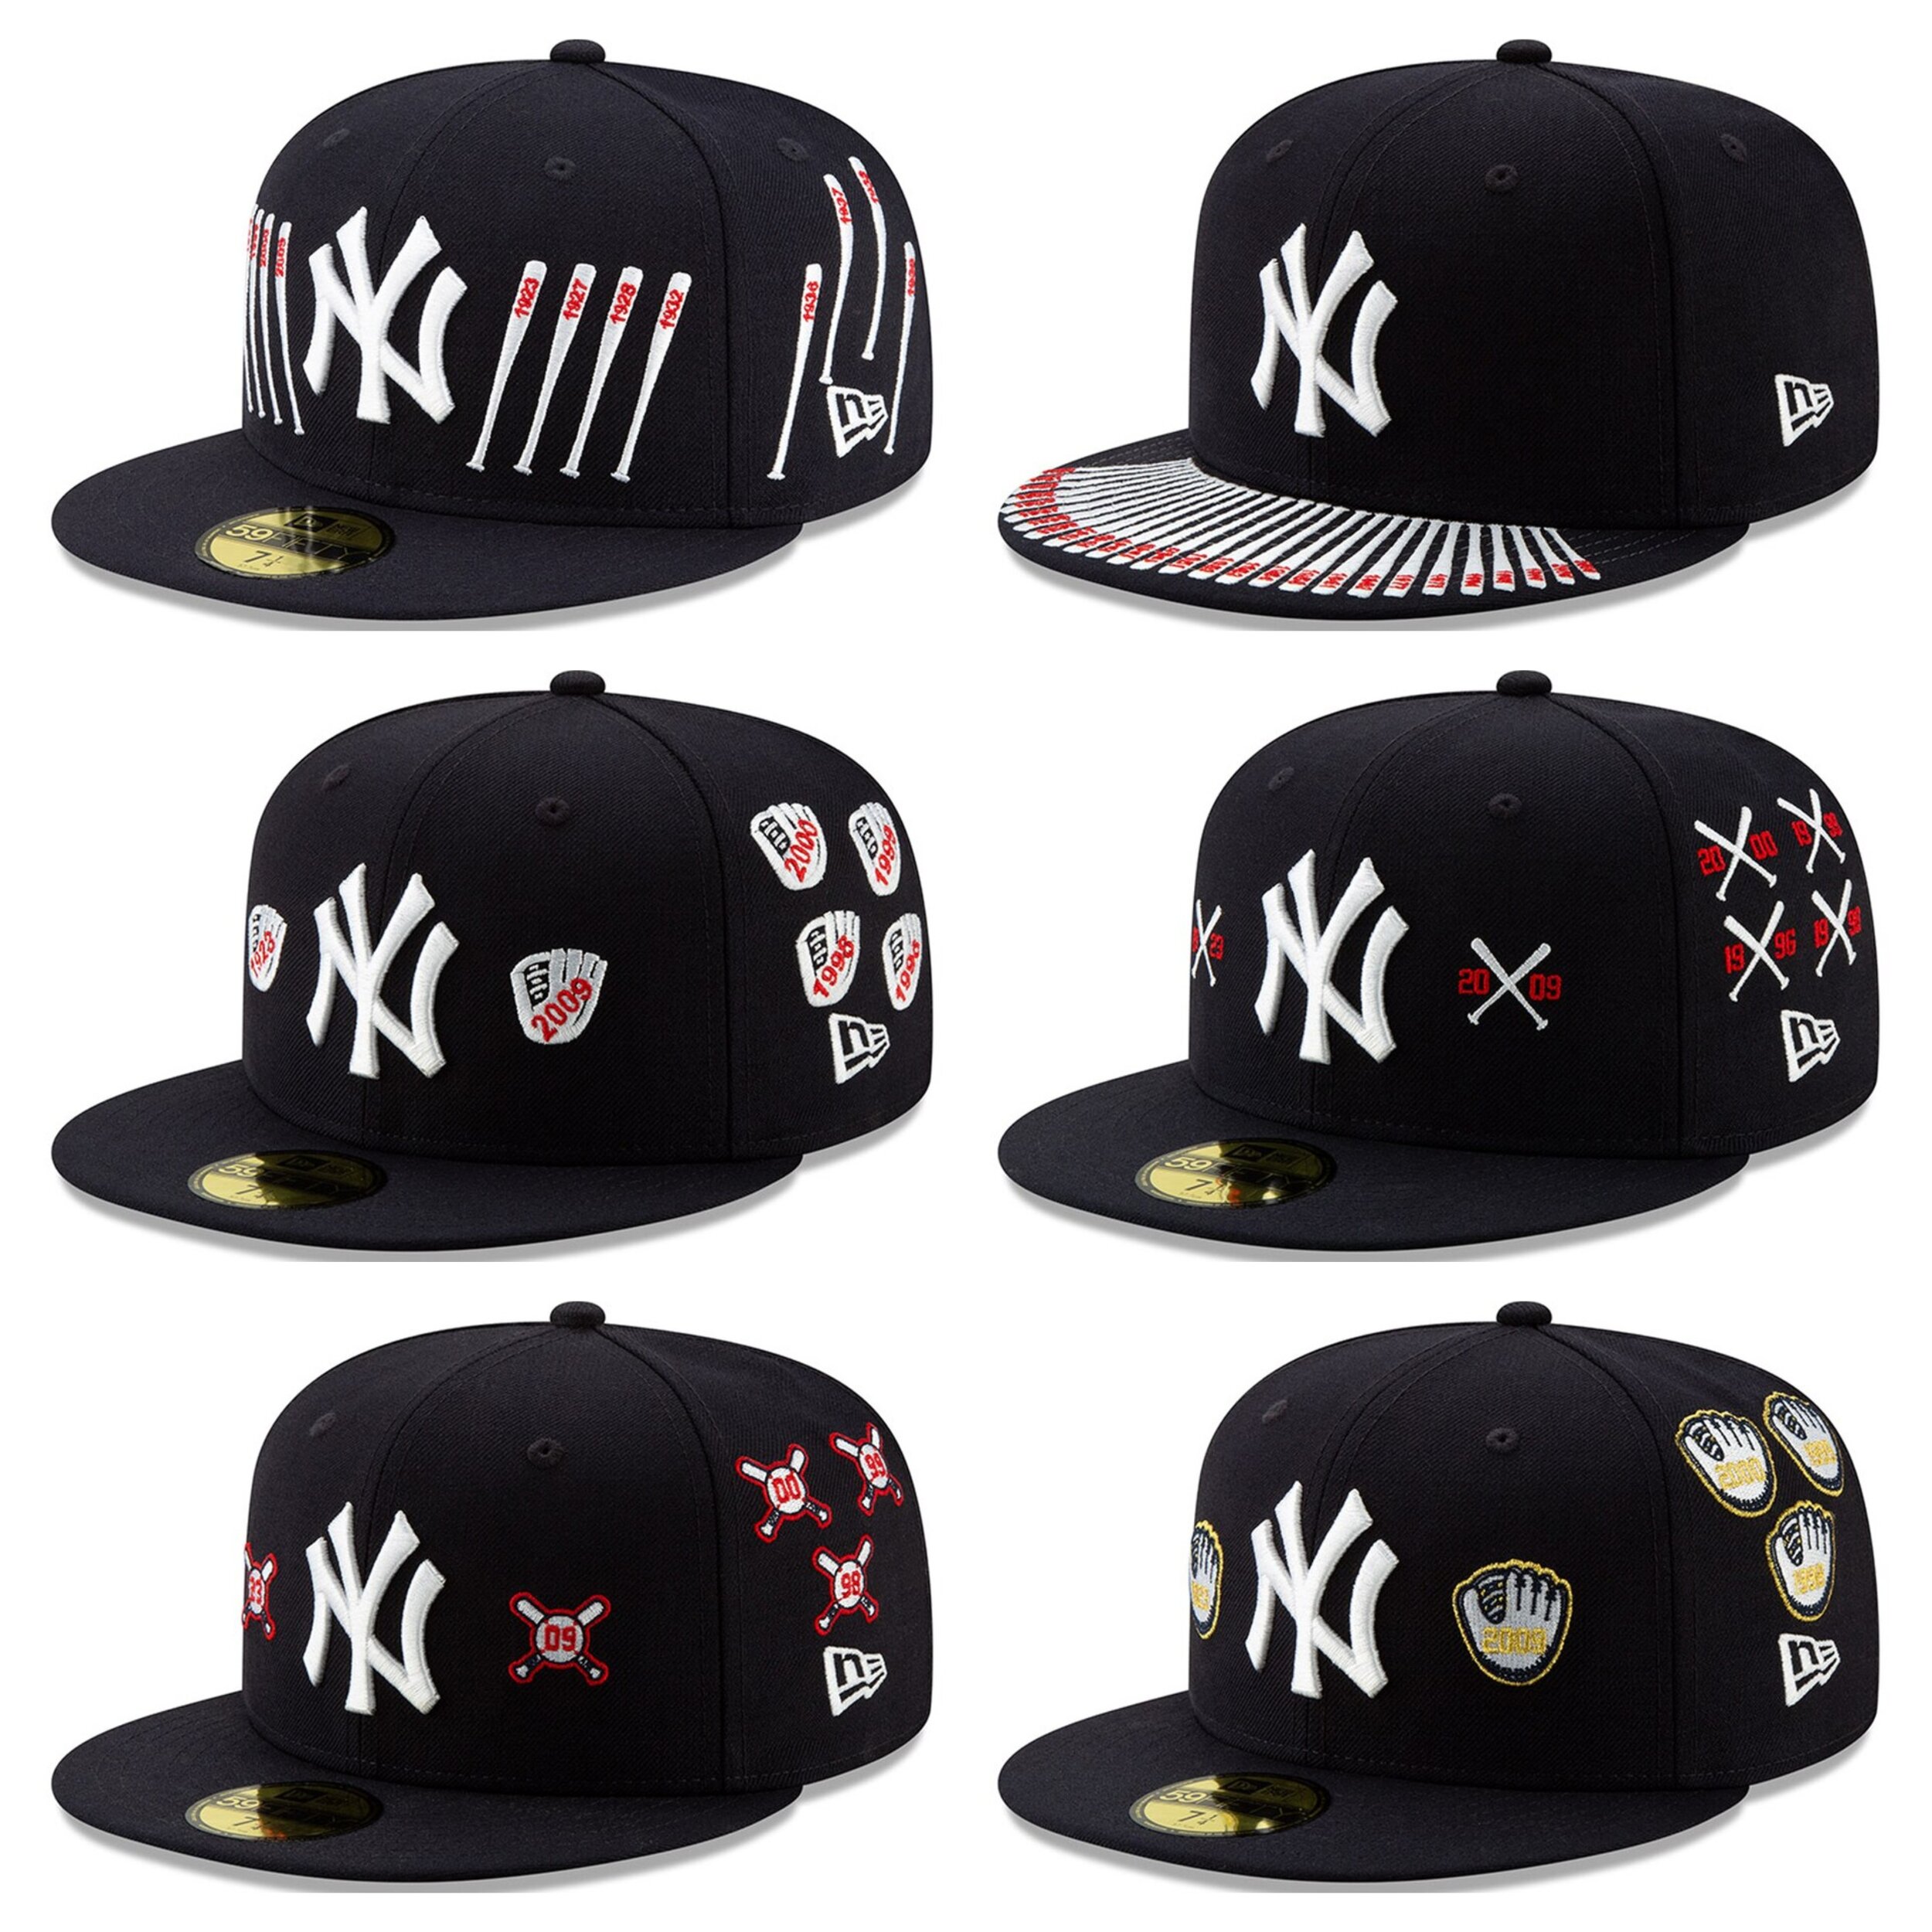 Now Available: Spike Lee x New Era New York Yankees 